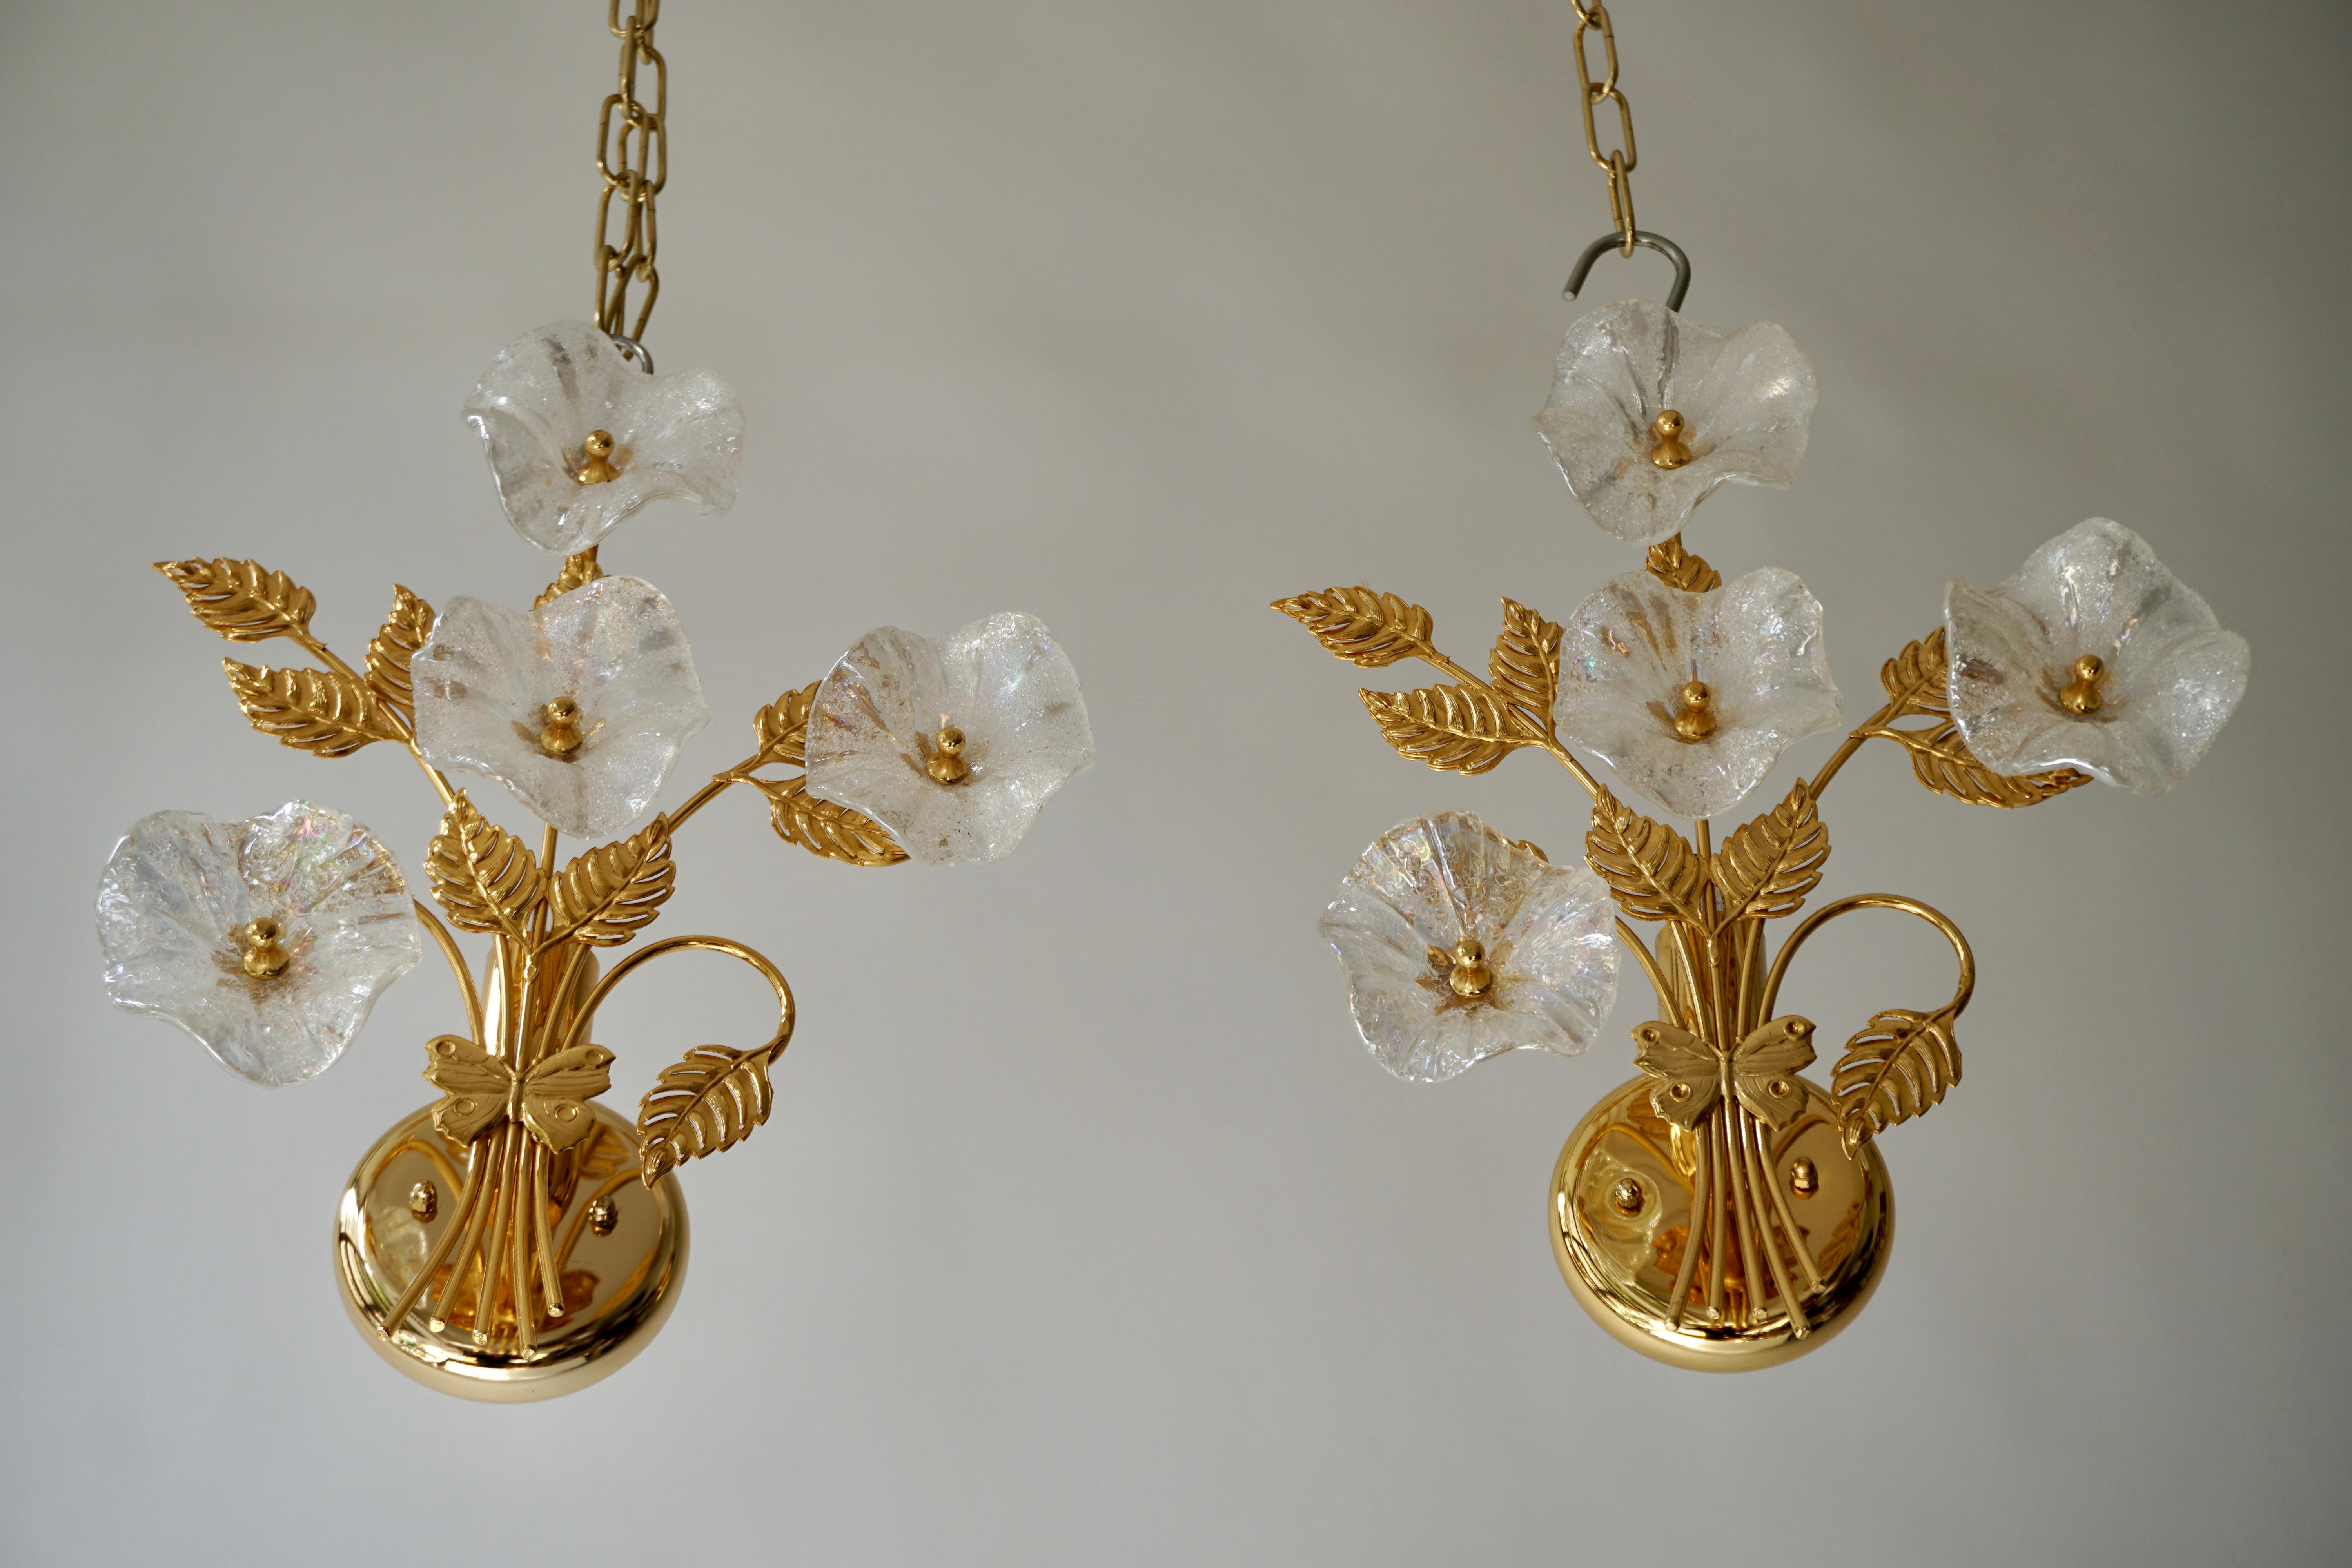 Pair of brass and Murano glass sconces, decoration flower shape. One bulbs per sconce.
Measures: Height 36 cm.
Width 30 cm.
Depth 13 cm.